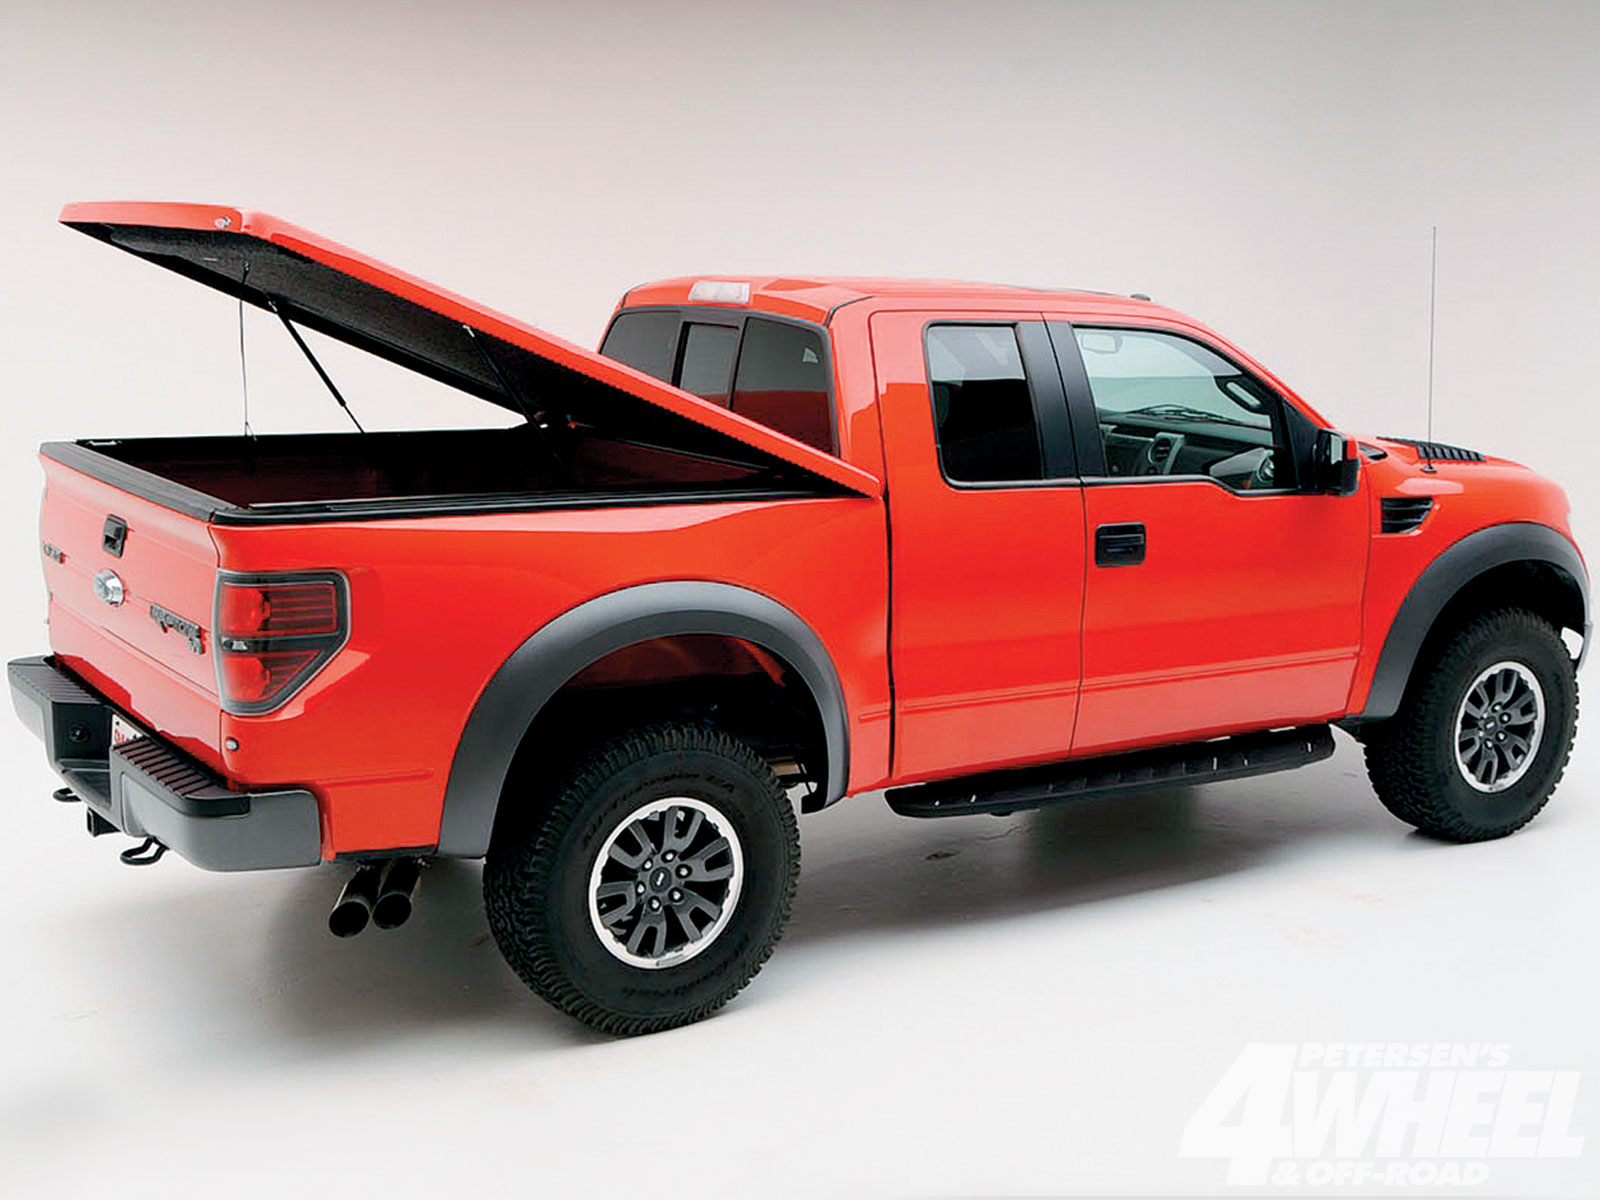 f150 tonneau covers truck bed covers ford f150 truck accessories Car ...